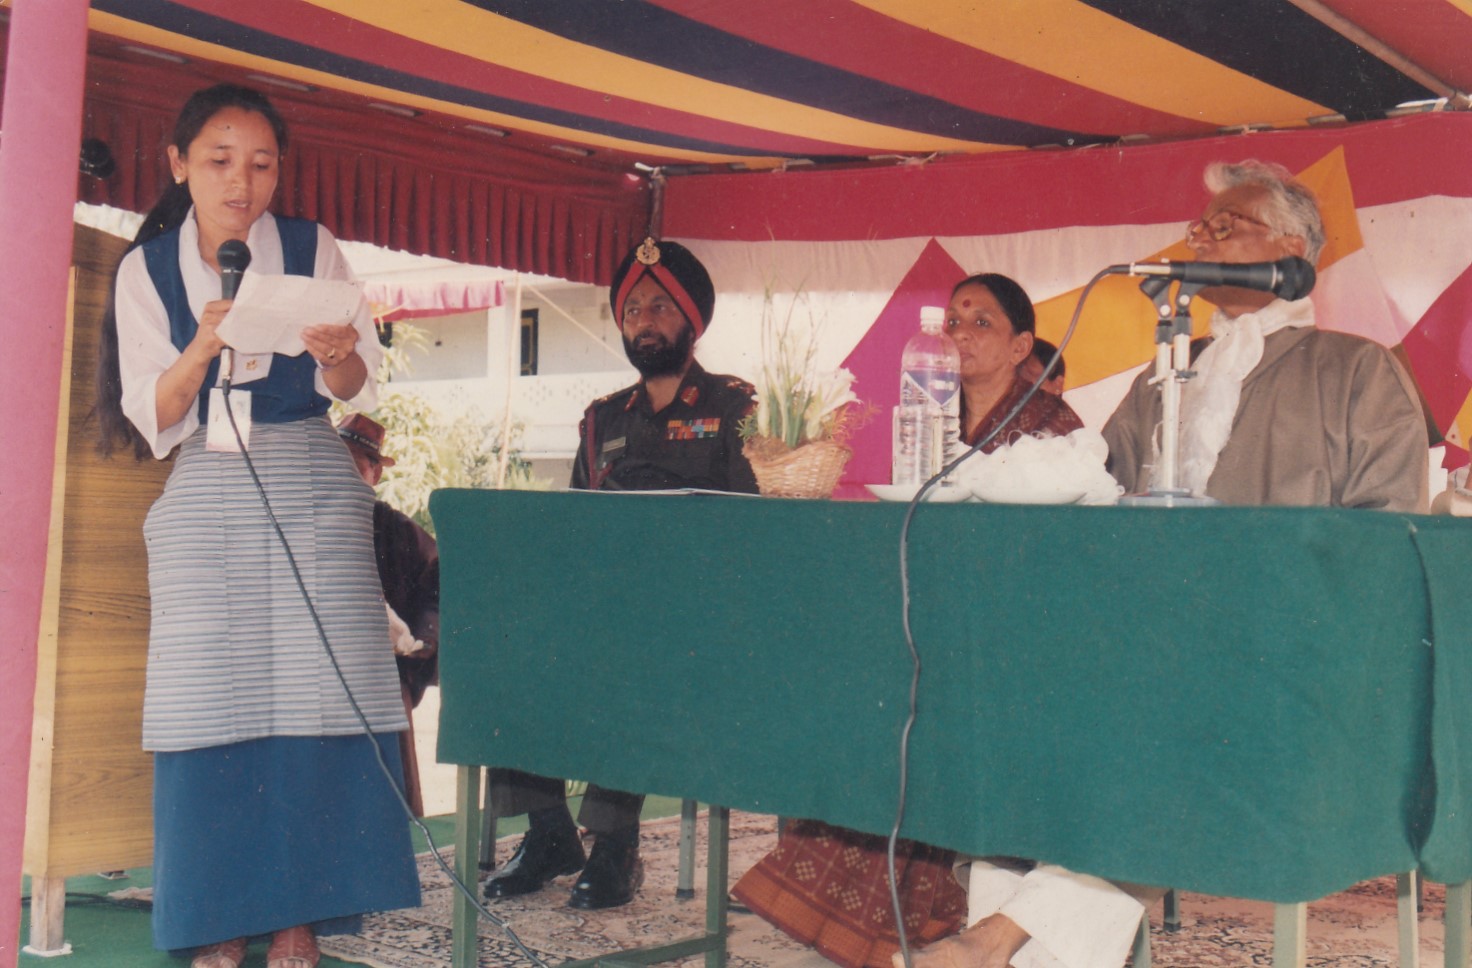 Mrs. Karma Dolma as the Herbertpur Tibetan Settlement Officer, delivering speech during the visit of Shri George Fernandes, then Defence Minister of India, IG SFF G.S. Uban, Ms. Jaya Jaitly, former President of Samata Party, 1998.